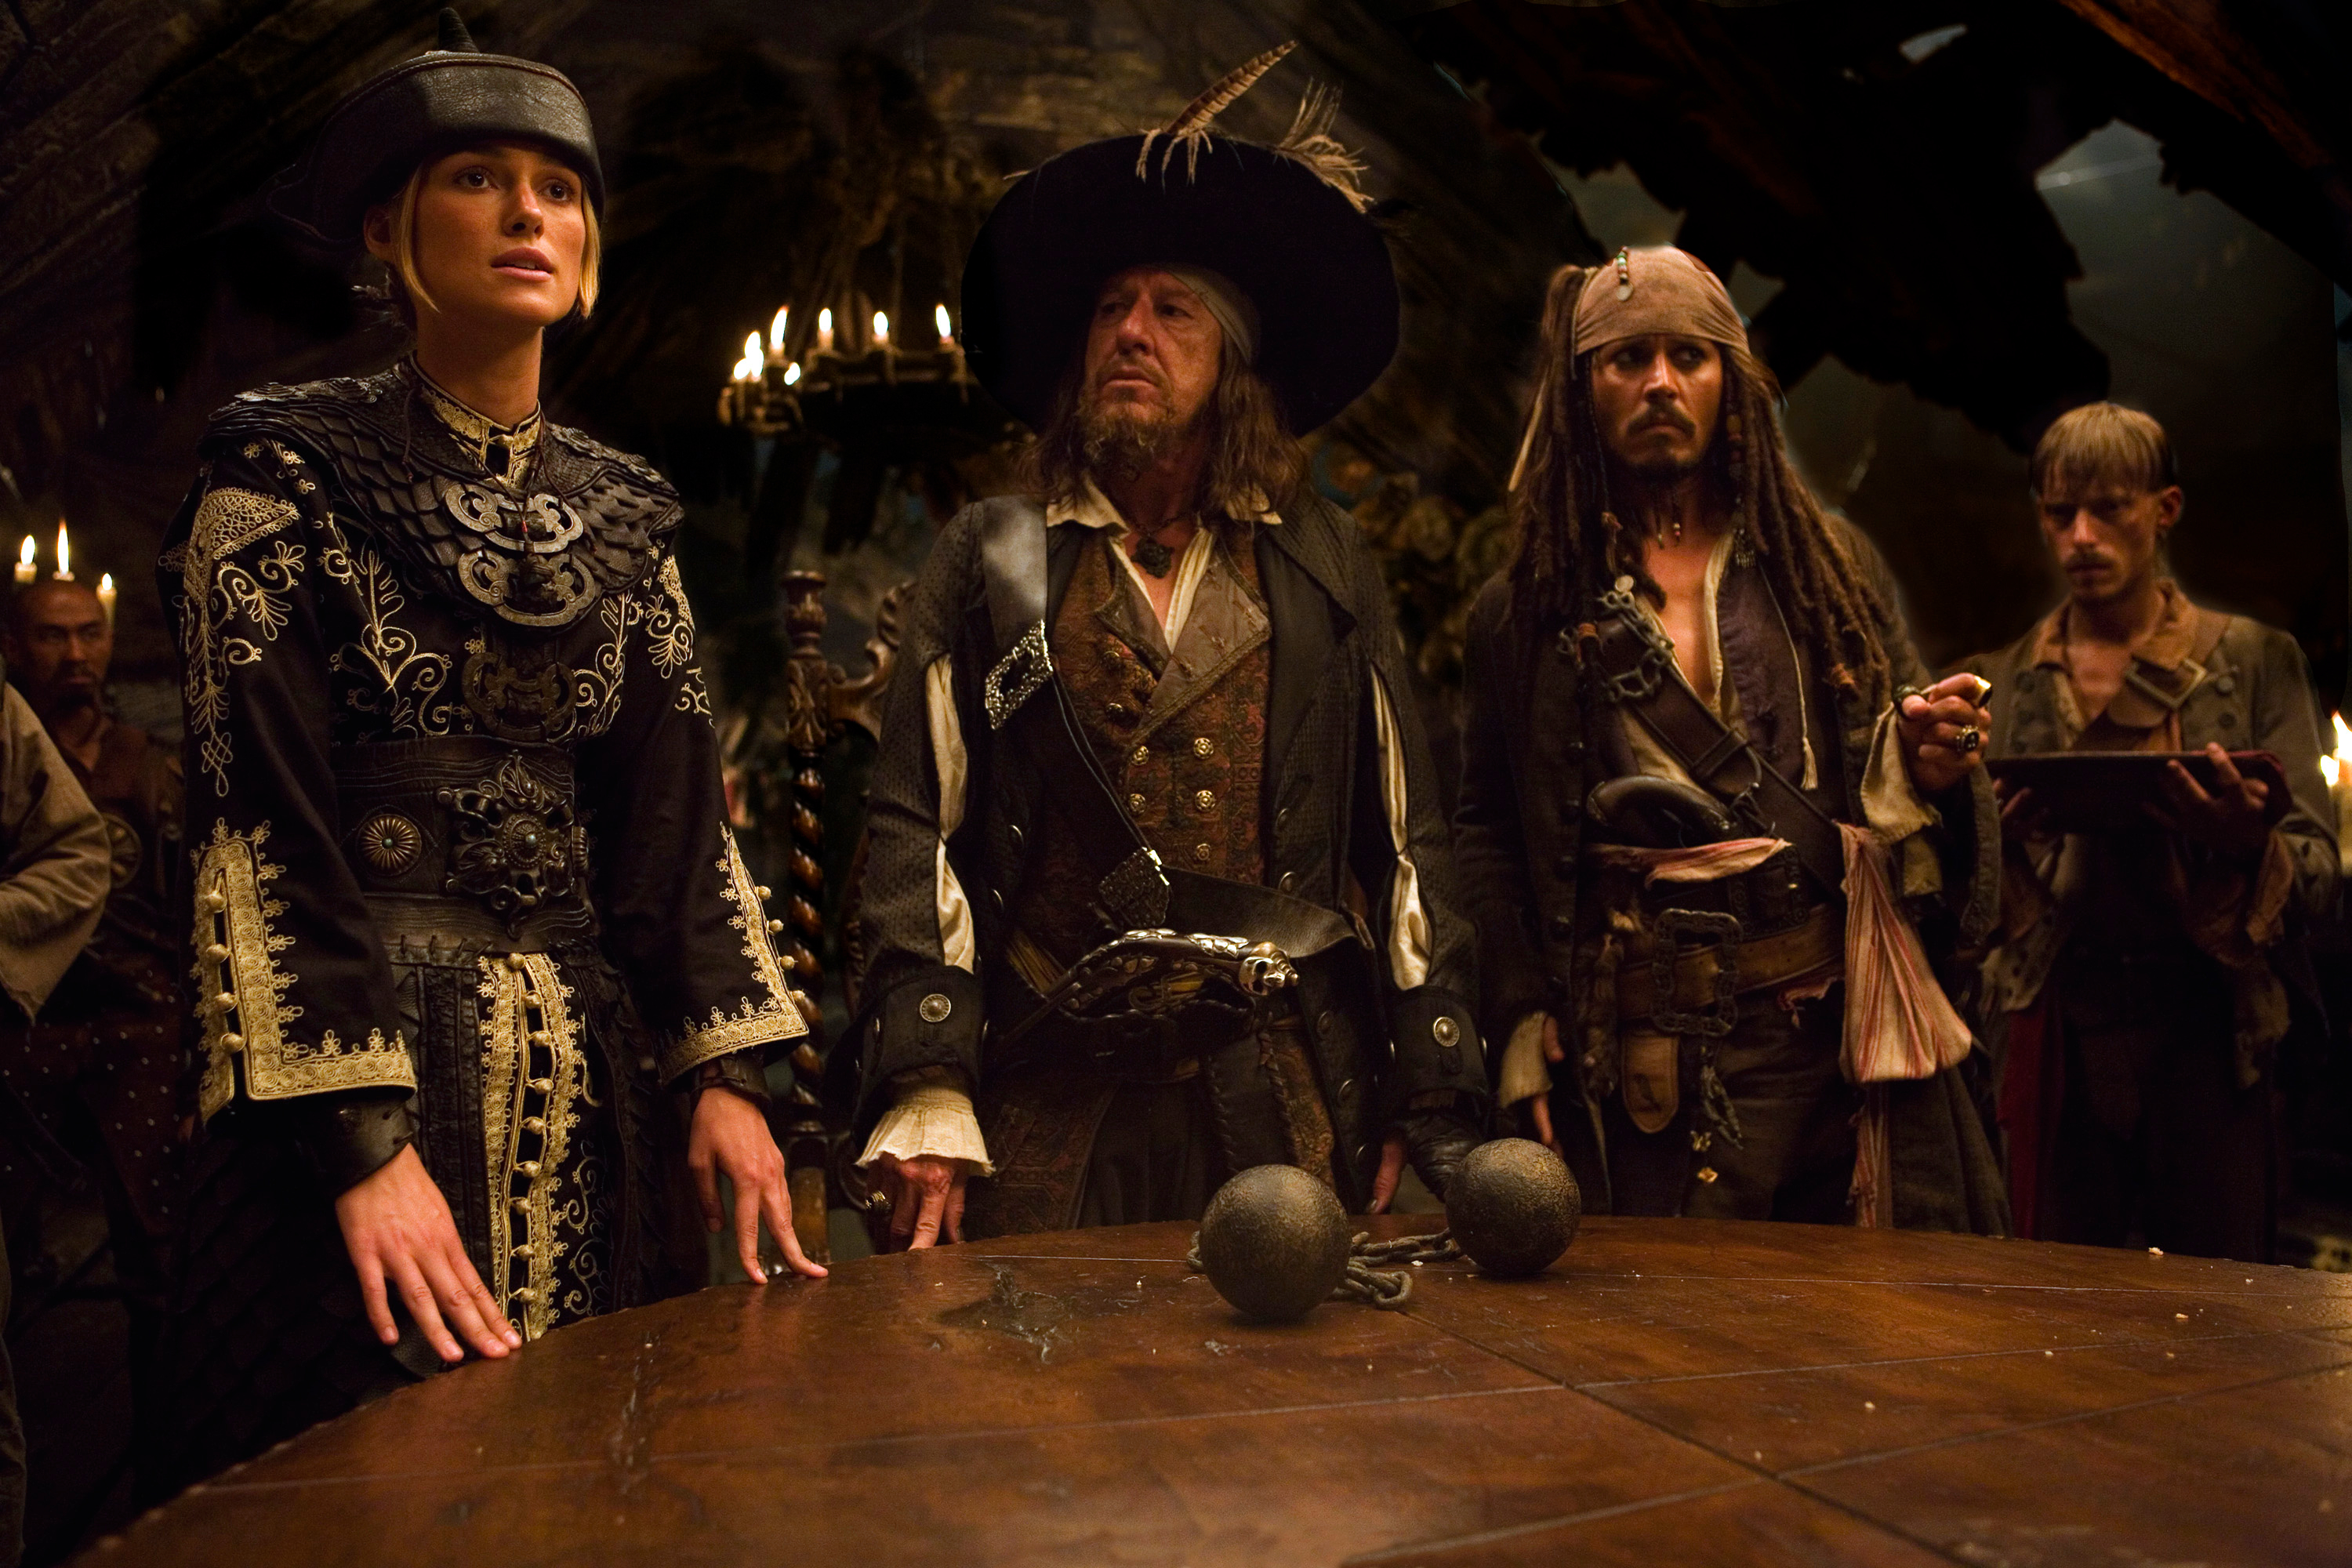 jack sparrow, johnny depp, pirates of the caribbean, hector barbossa, keira knightley, movie, pirates of the caribbean: at world's end, elizabeth swann, geoffrey rush, mackenzie crook, ragetti (pirates of the caribbean)